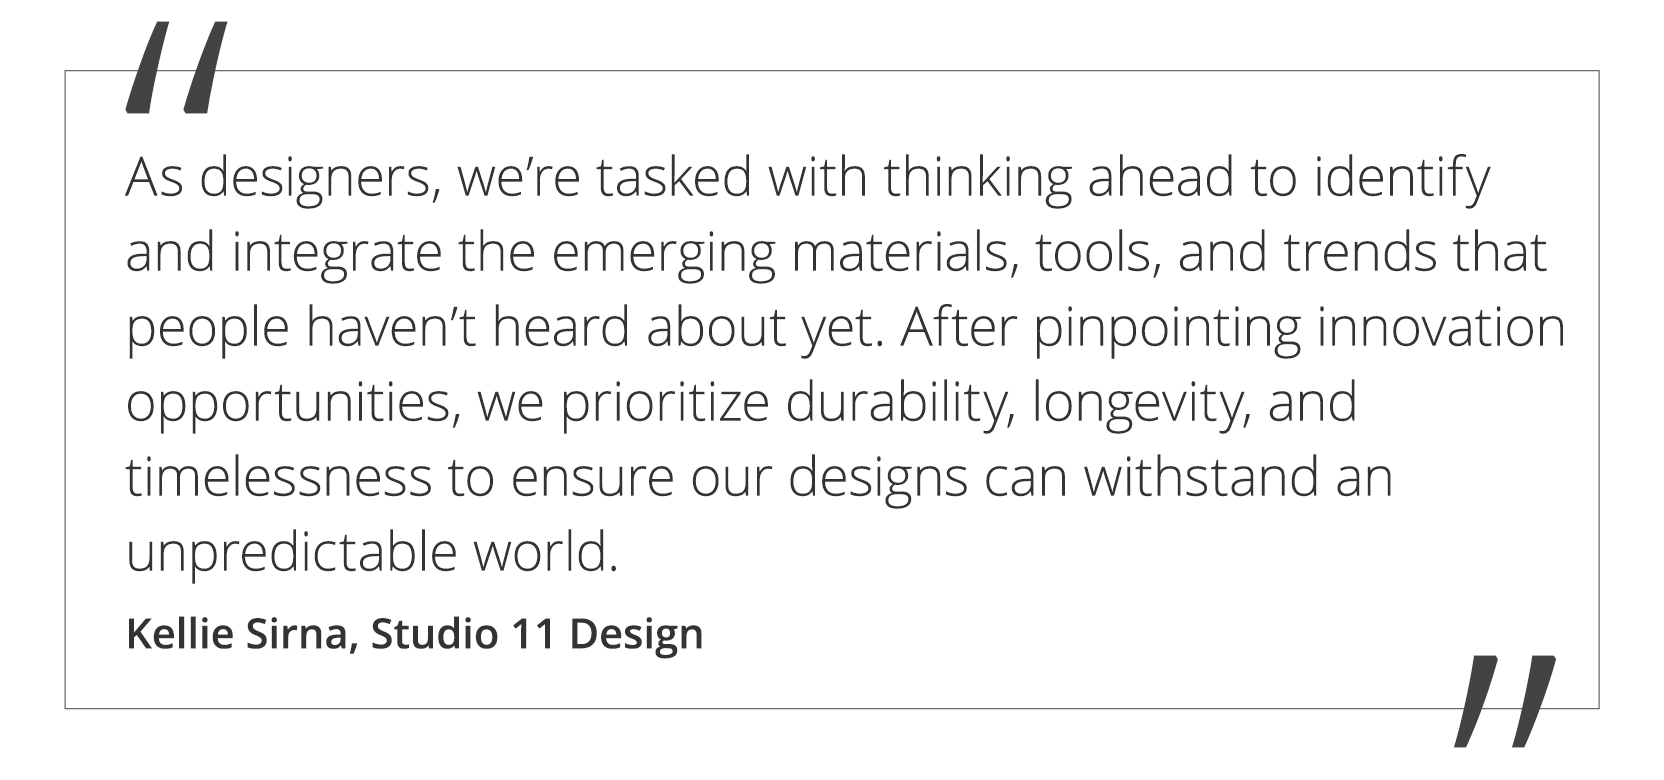 A quote by Kellie Sirna at Studio 11 Design stating, "As designers, we’re tasked with thinking ahead to identify and integrate with the emerging materials, tools, and trends that people haven’t heard about yet. After pinpointing innovation opportunities, we prioritize durability, longevity, and timelessness to ensure our designs can withstand an unpredictable world.” 